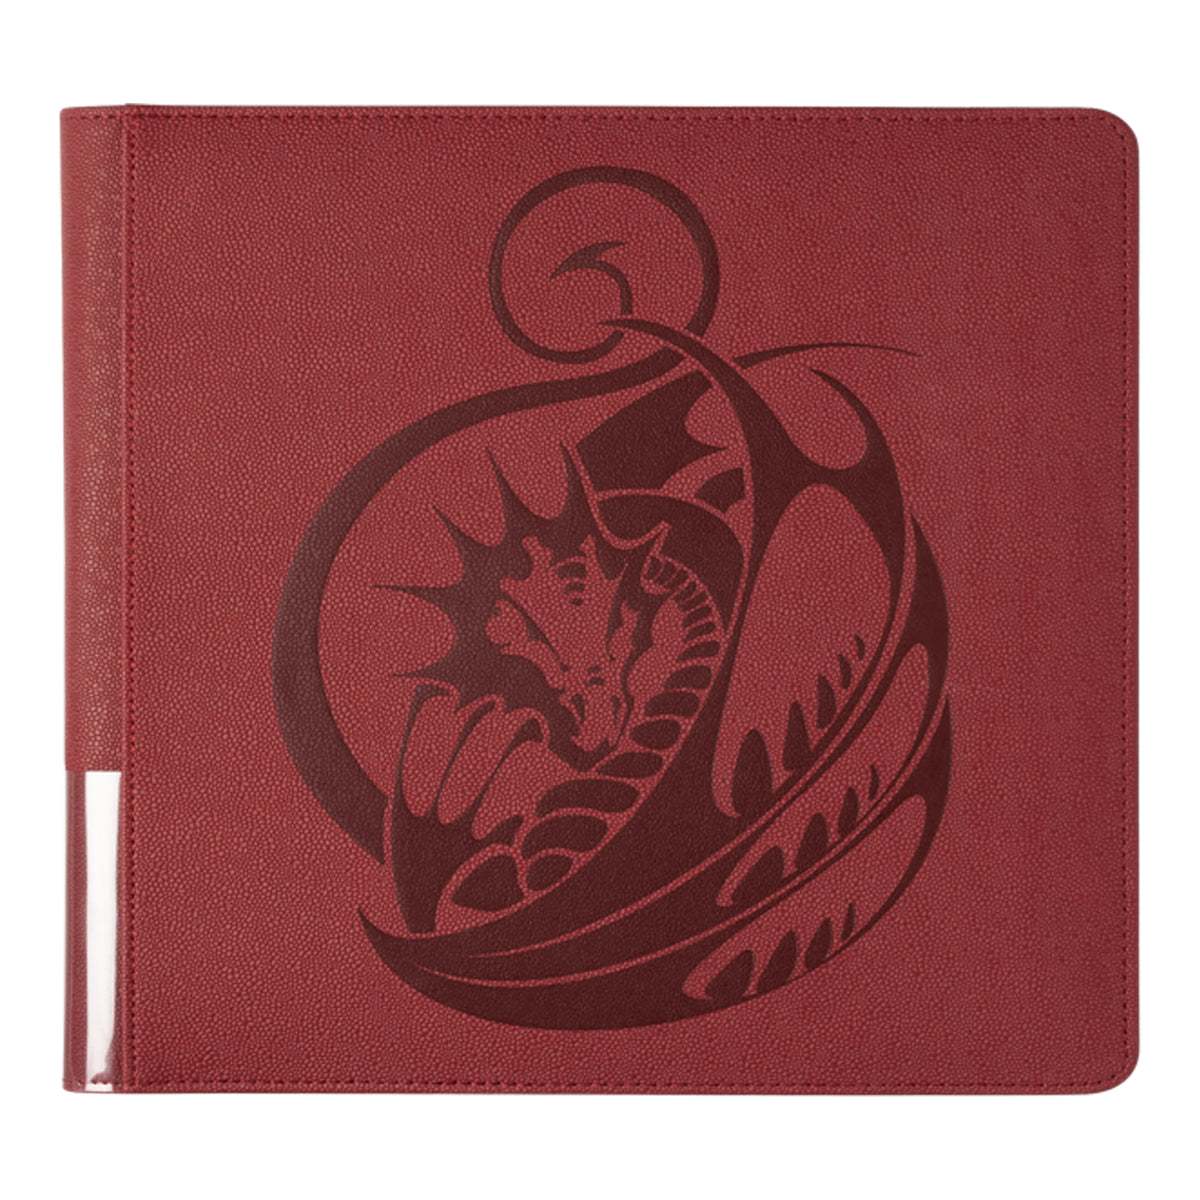 Dragon Shield - Zipster XL - Blood Red